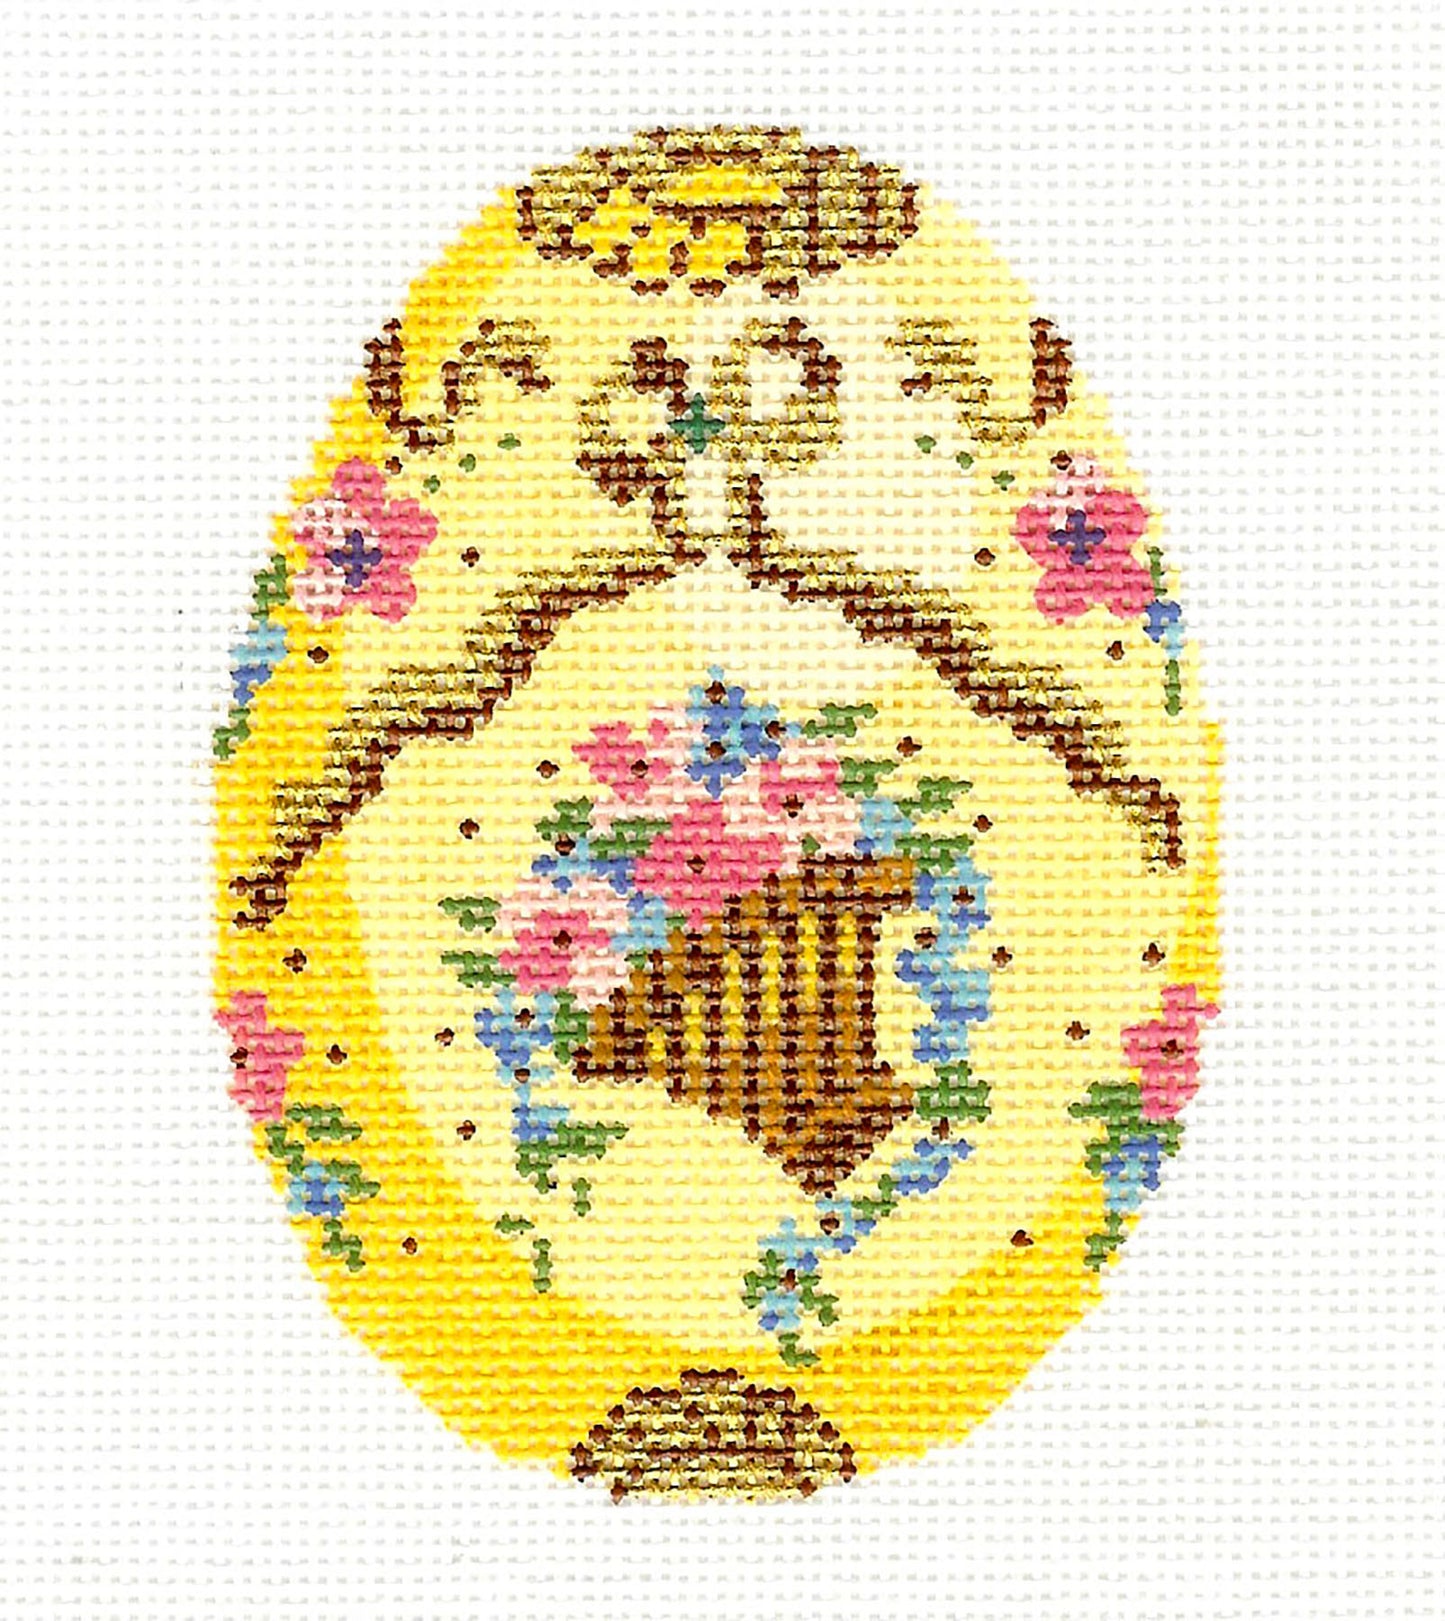 Faberge Egg ~ Jeweled EASTER BASKET Faberge EGG 18 Mesh handpainted Needlepoint Canvas by LEE